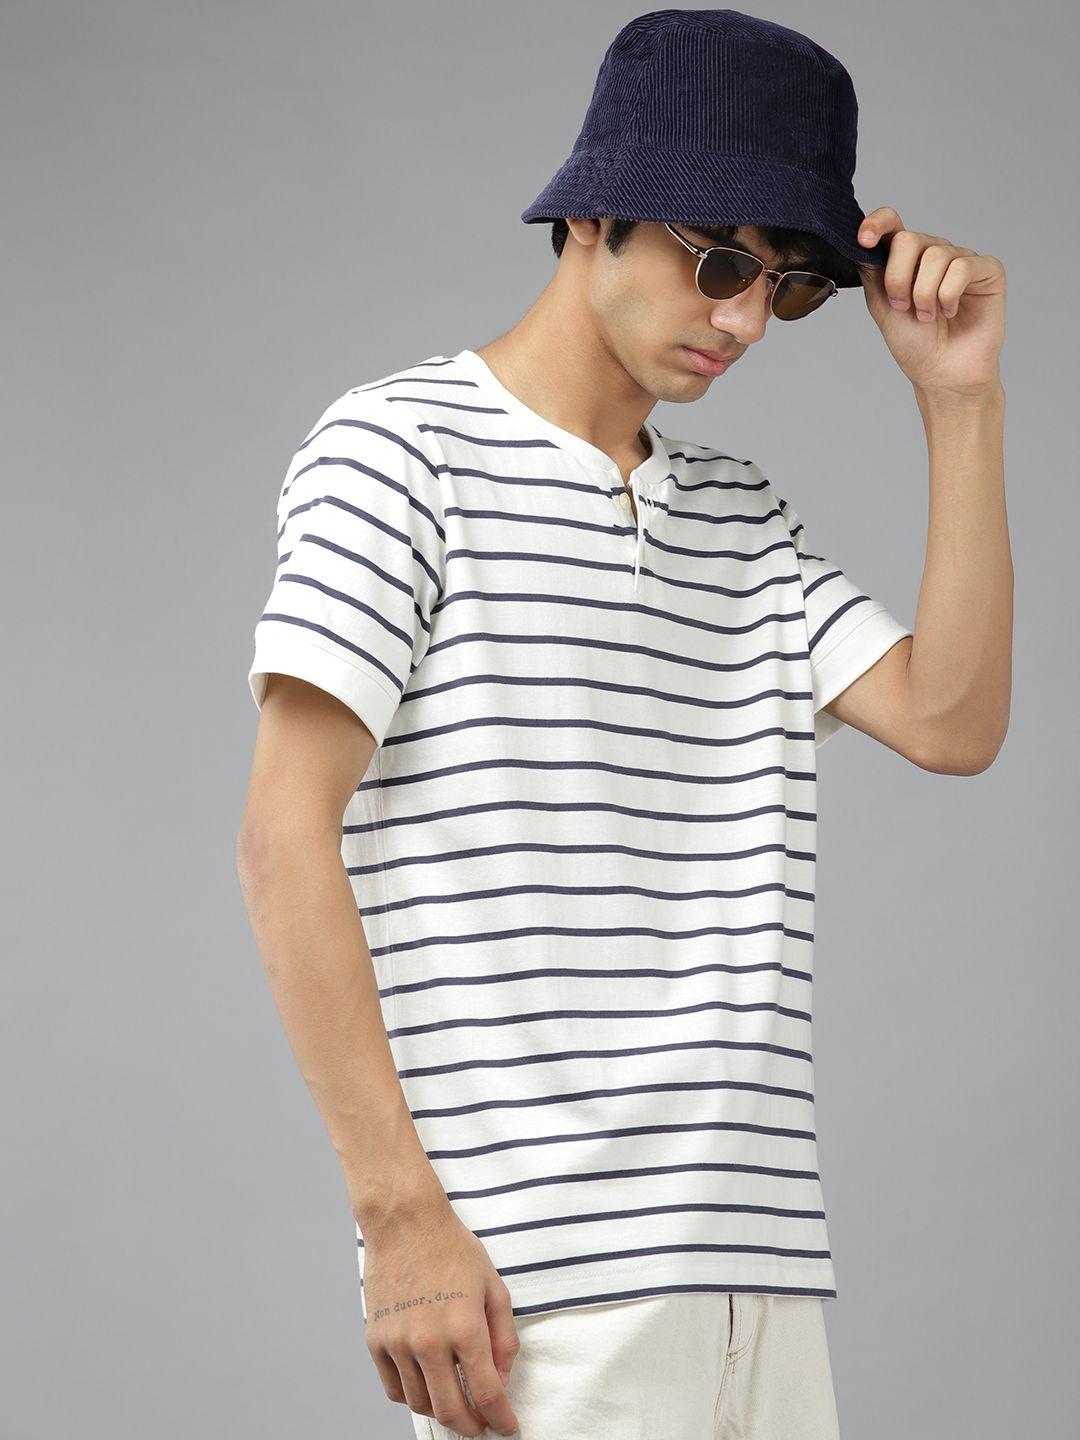 uth by roadster boys white & navy blue striped pure cotton henley neck t-shirt